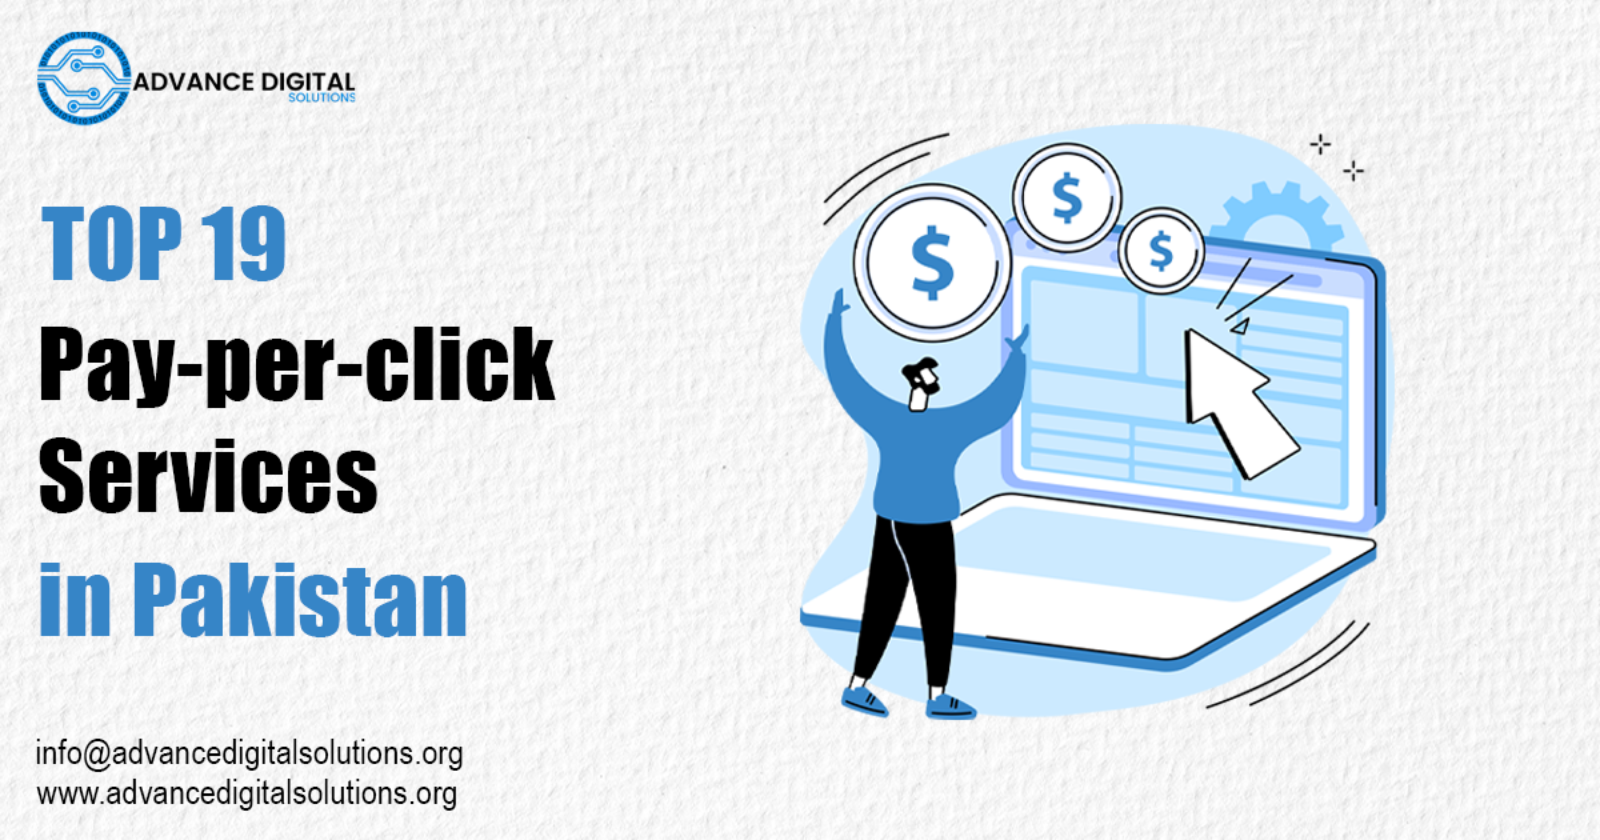 Top 19 Pay-per-click Services in Pakistan